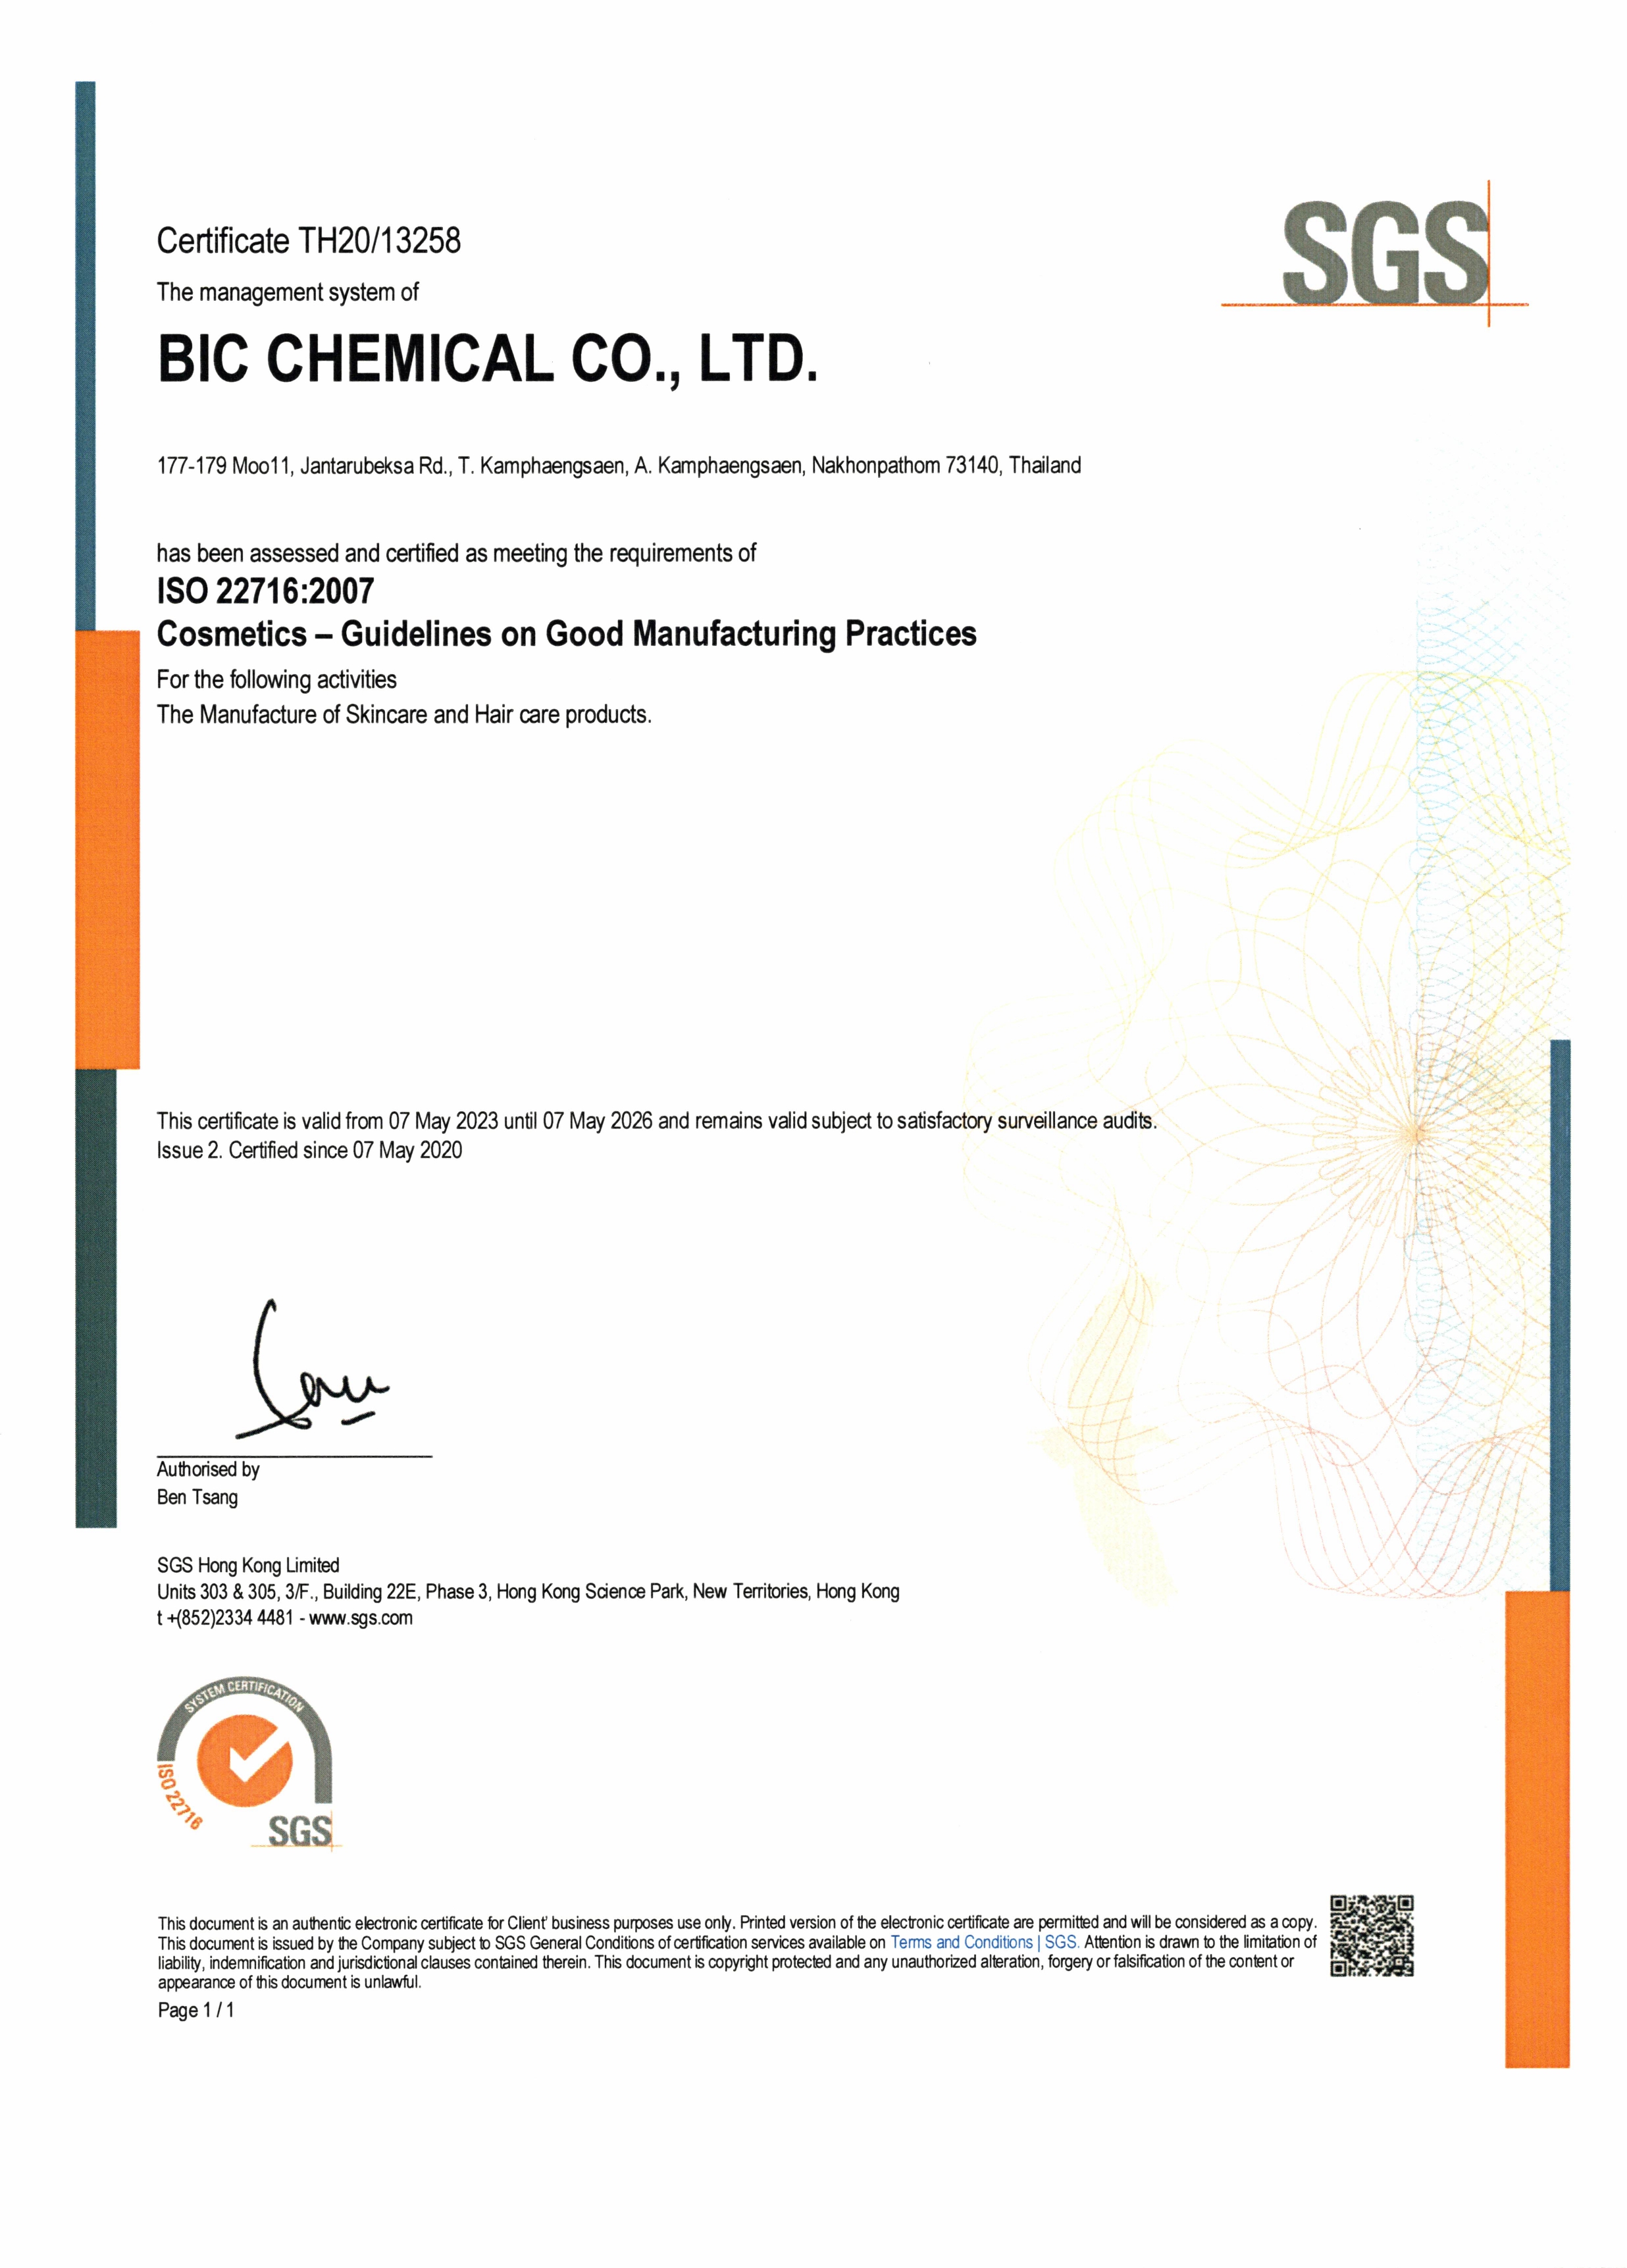 Certificate ISO 22716 The Manufacture of Skincare and Hair care products.